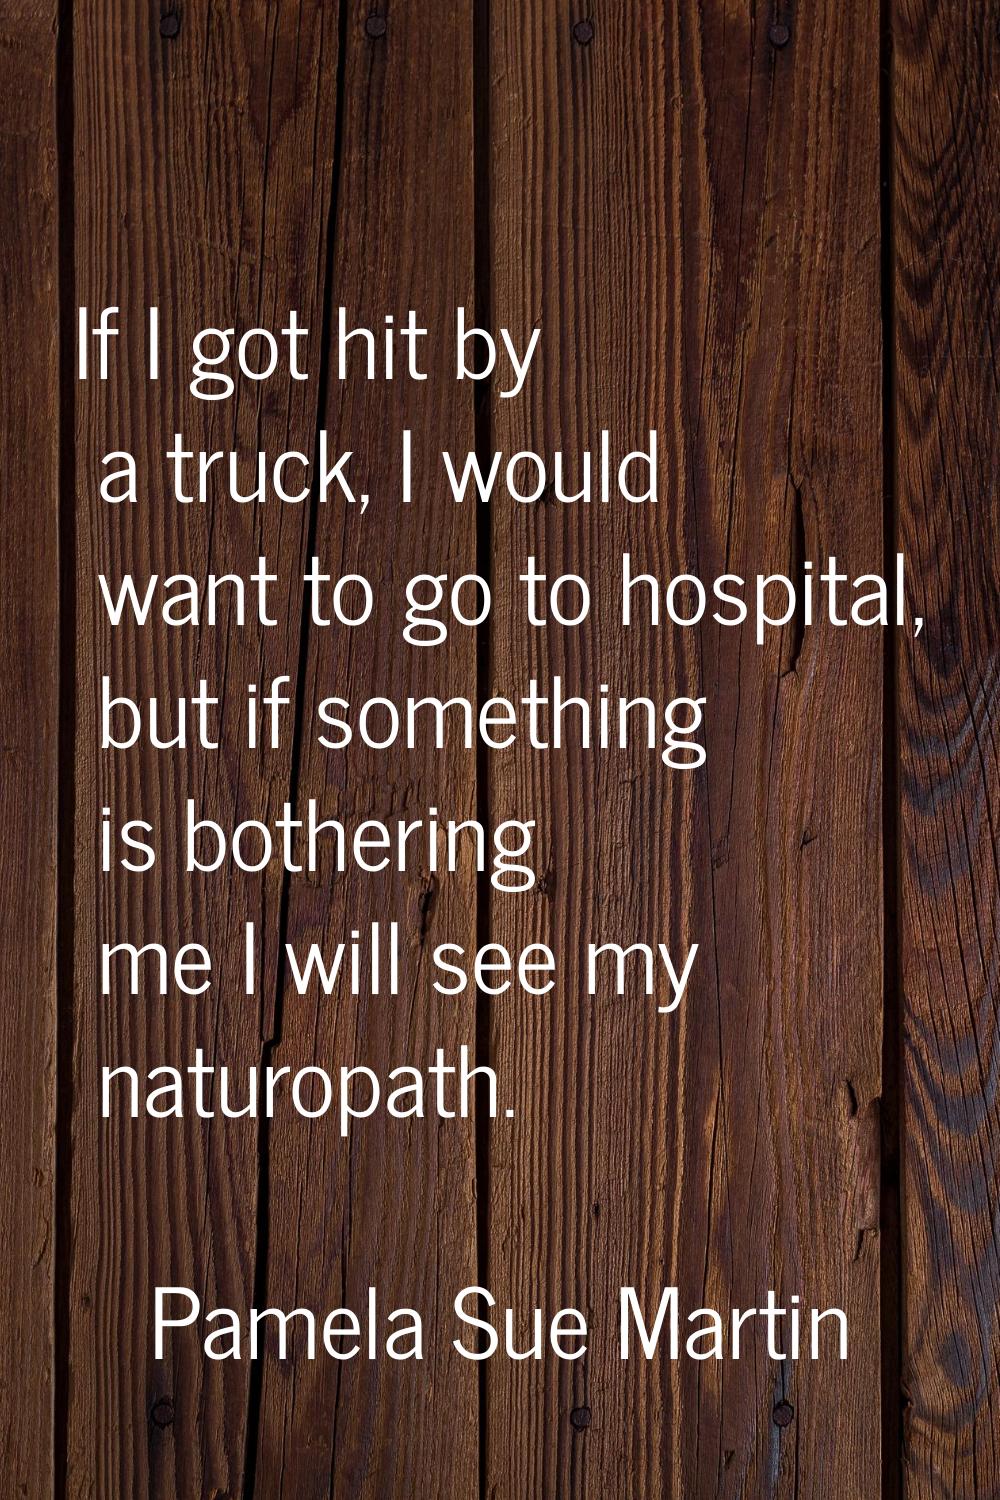 If I got hit by a truck, I would want to go to hospital, but if something is bothering me I will se